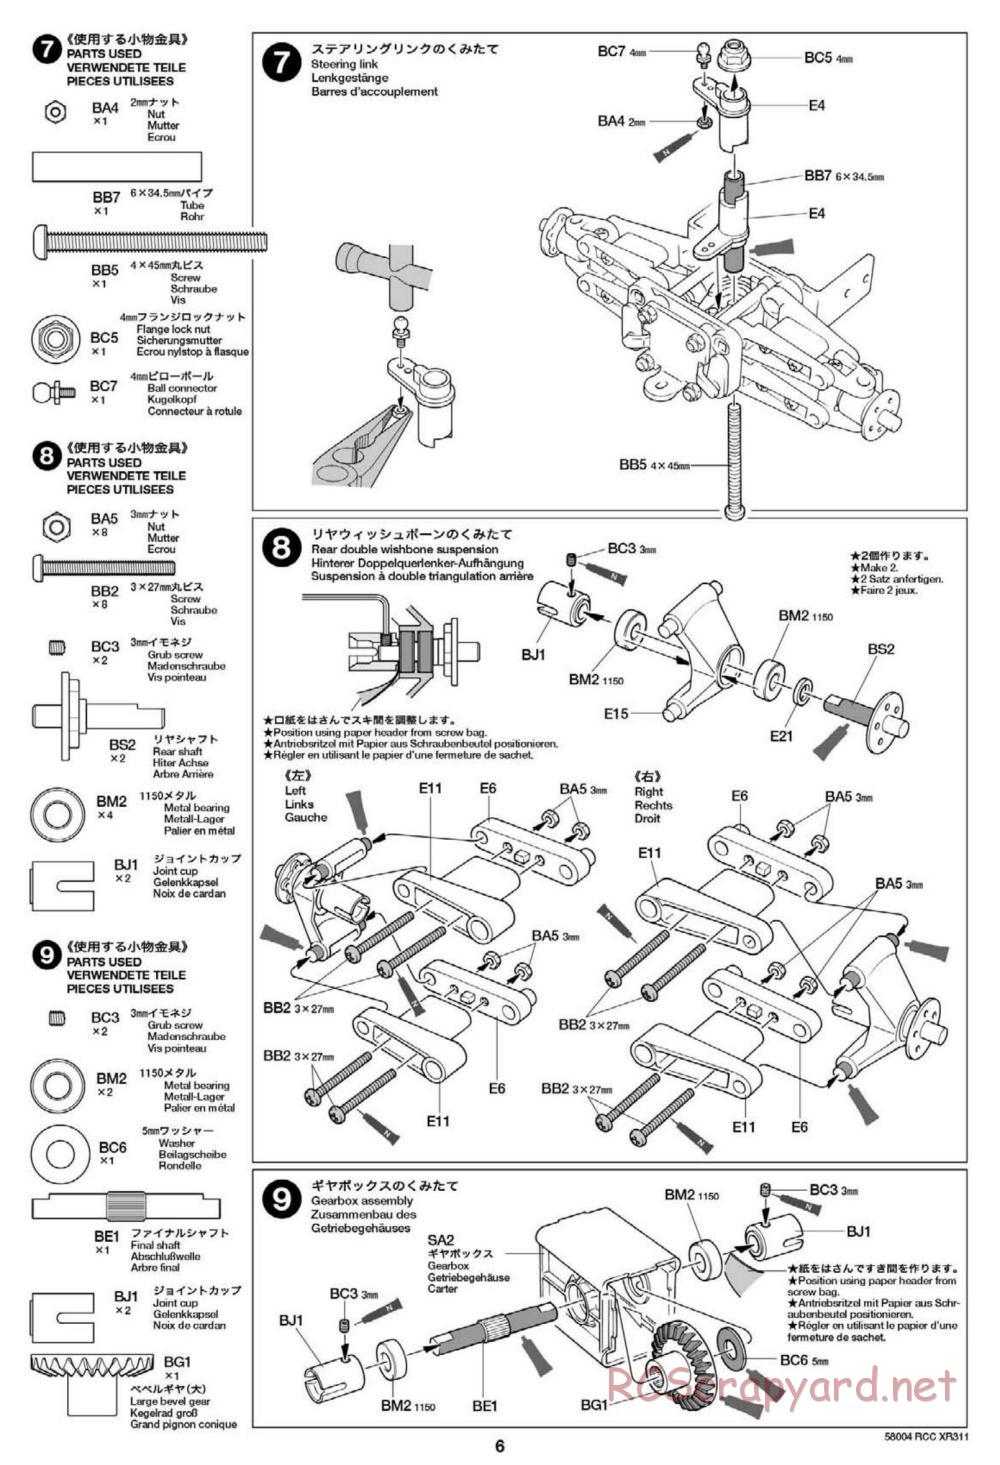 Tamiya - XR311 Combat Support Vehicle (2012) Chassis - Manual - Page 6